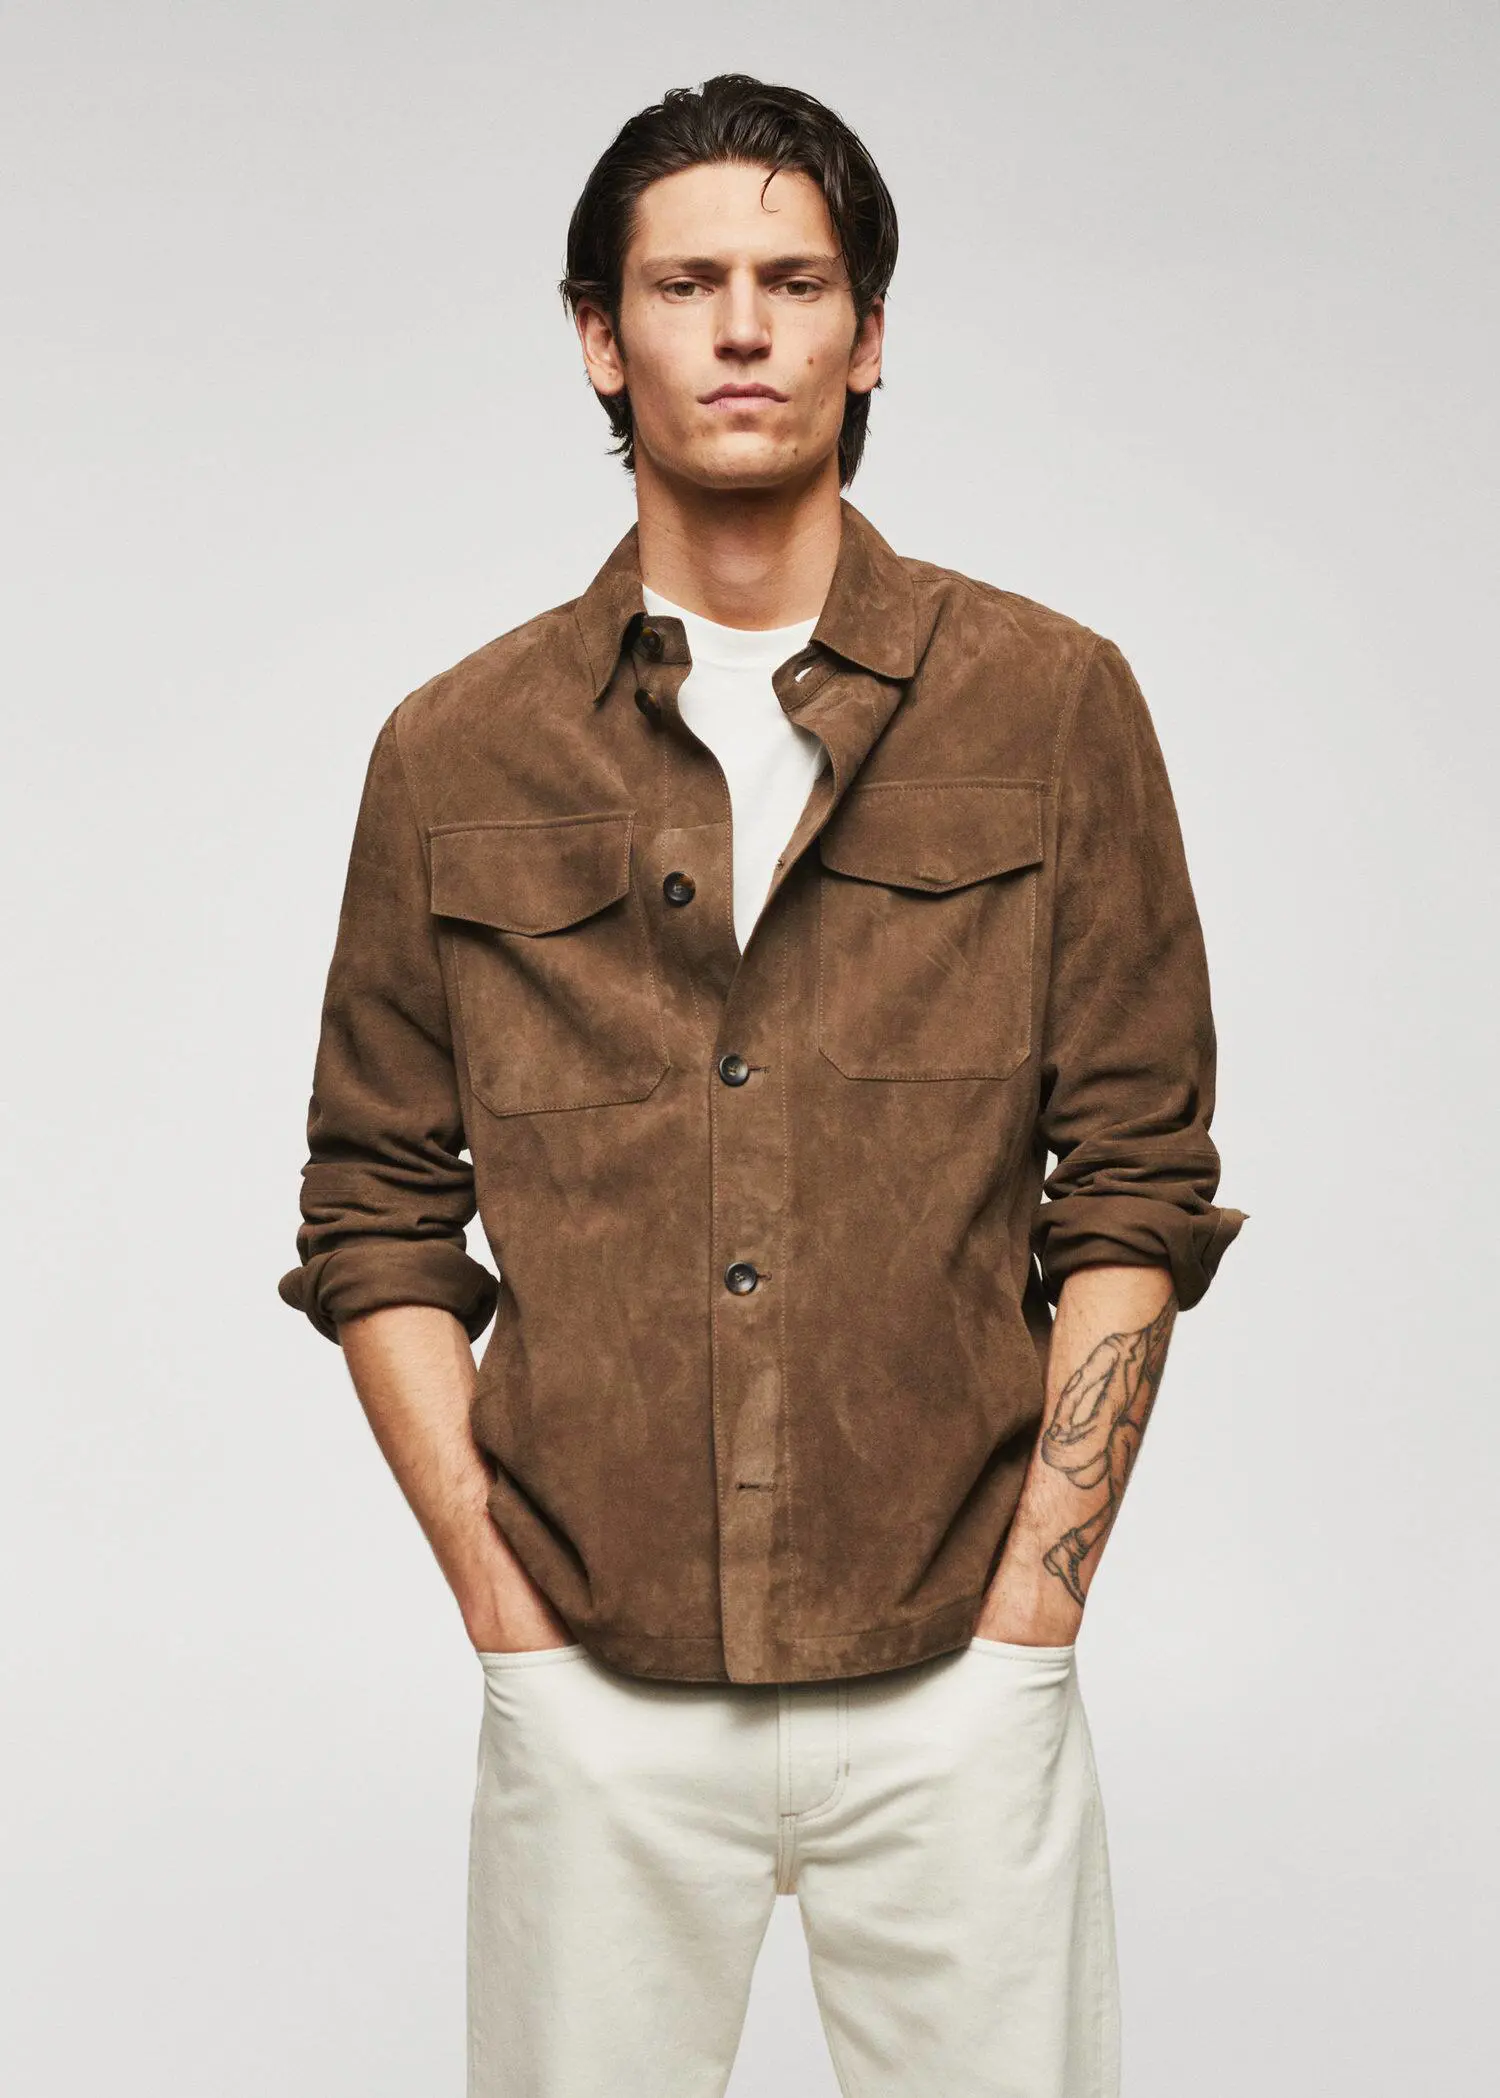 Mango 100% suede leather jacket. a man wearing a brown shirt and white pants. 